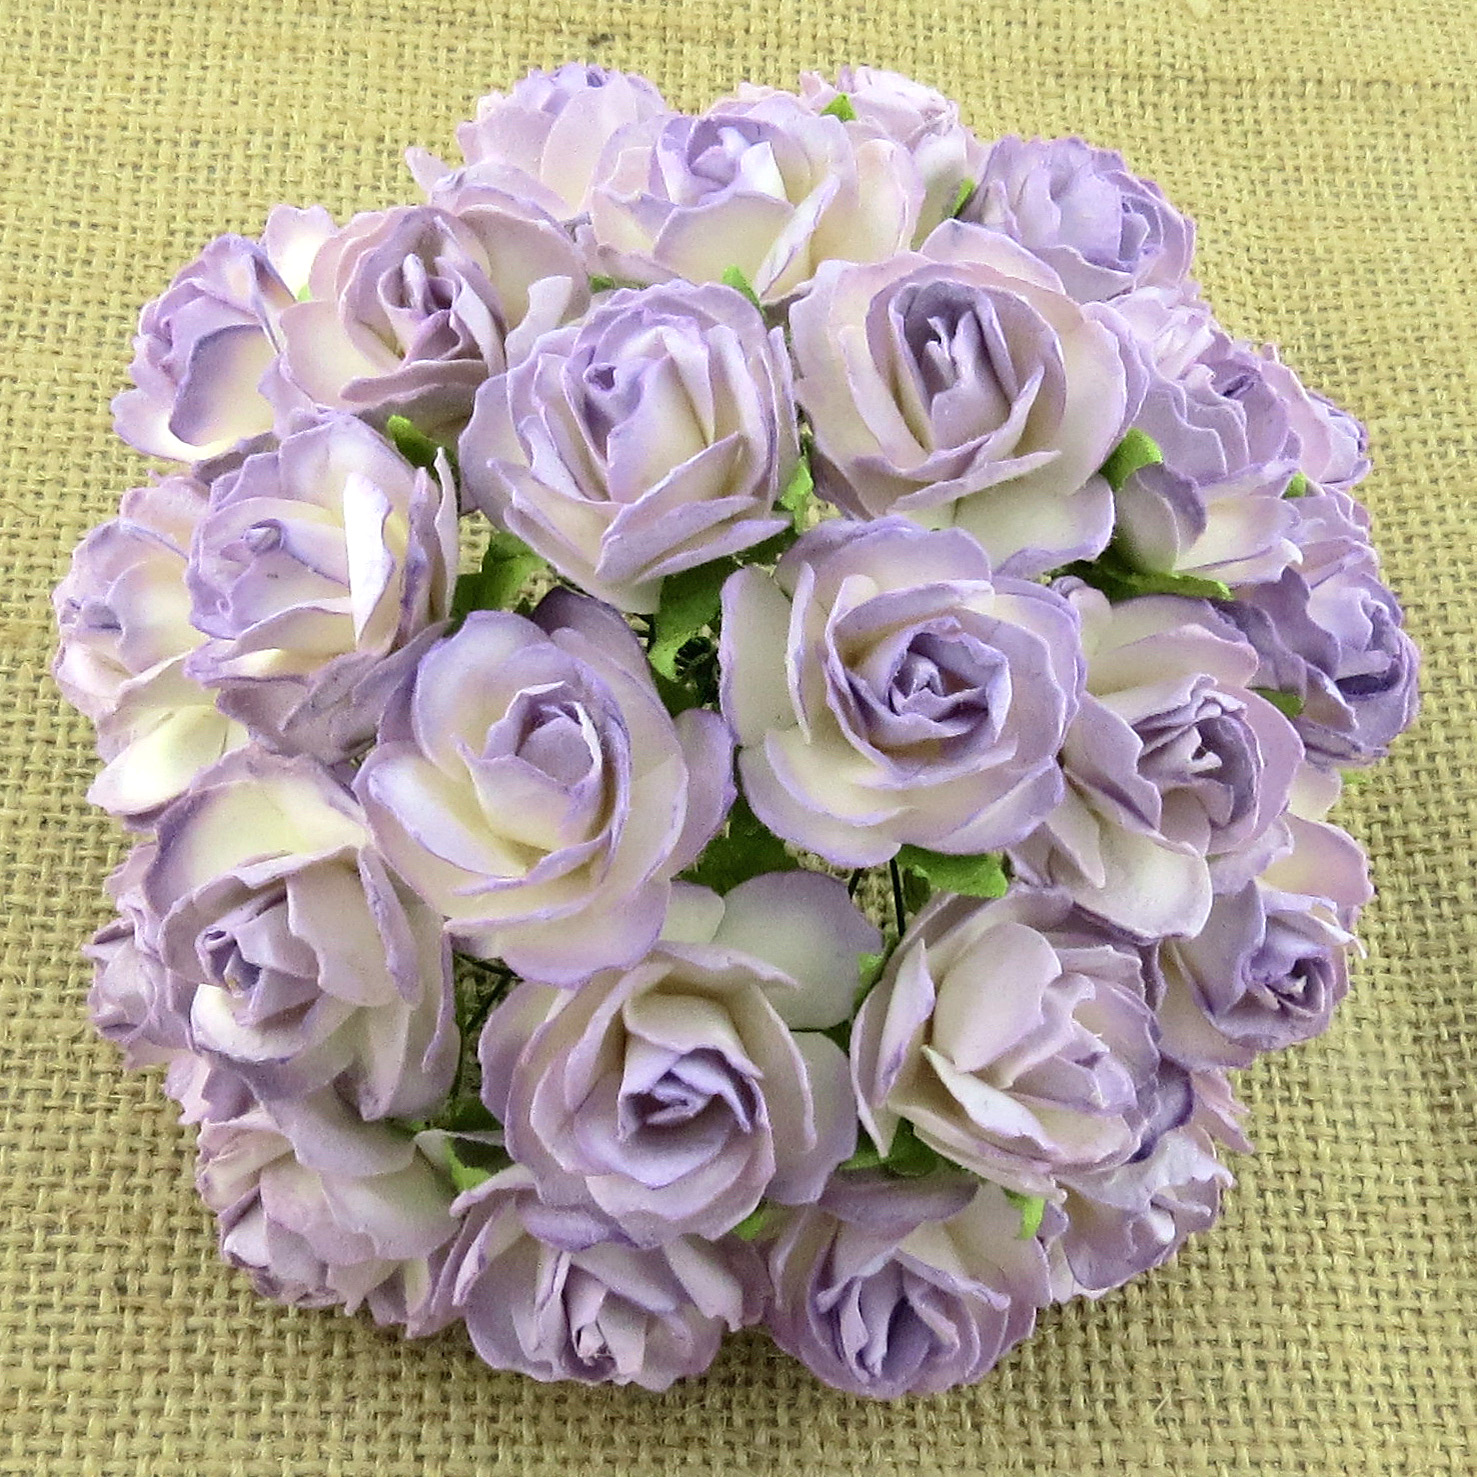 50 2-TONE LILAC MULBERRY PAPER WILD ROSES - 30mm